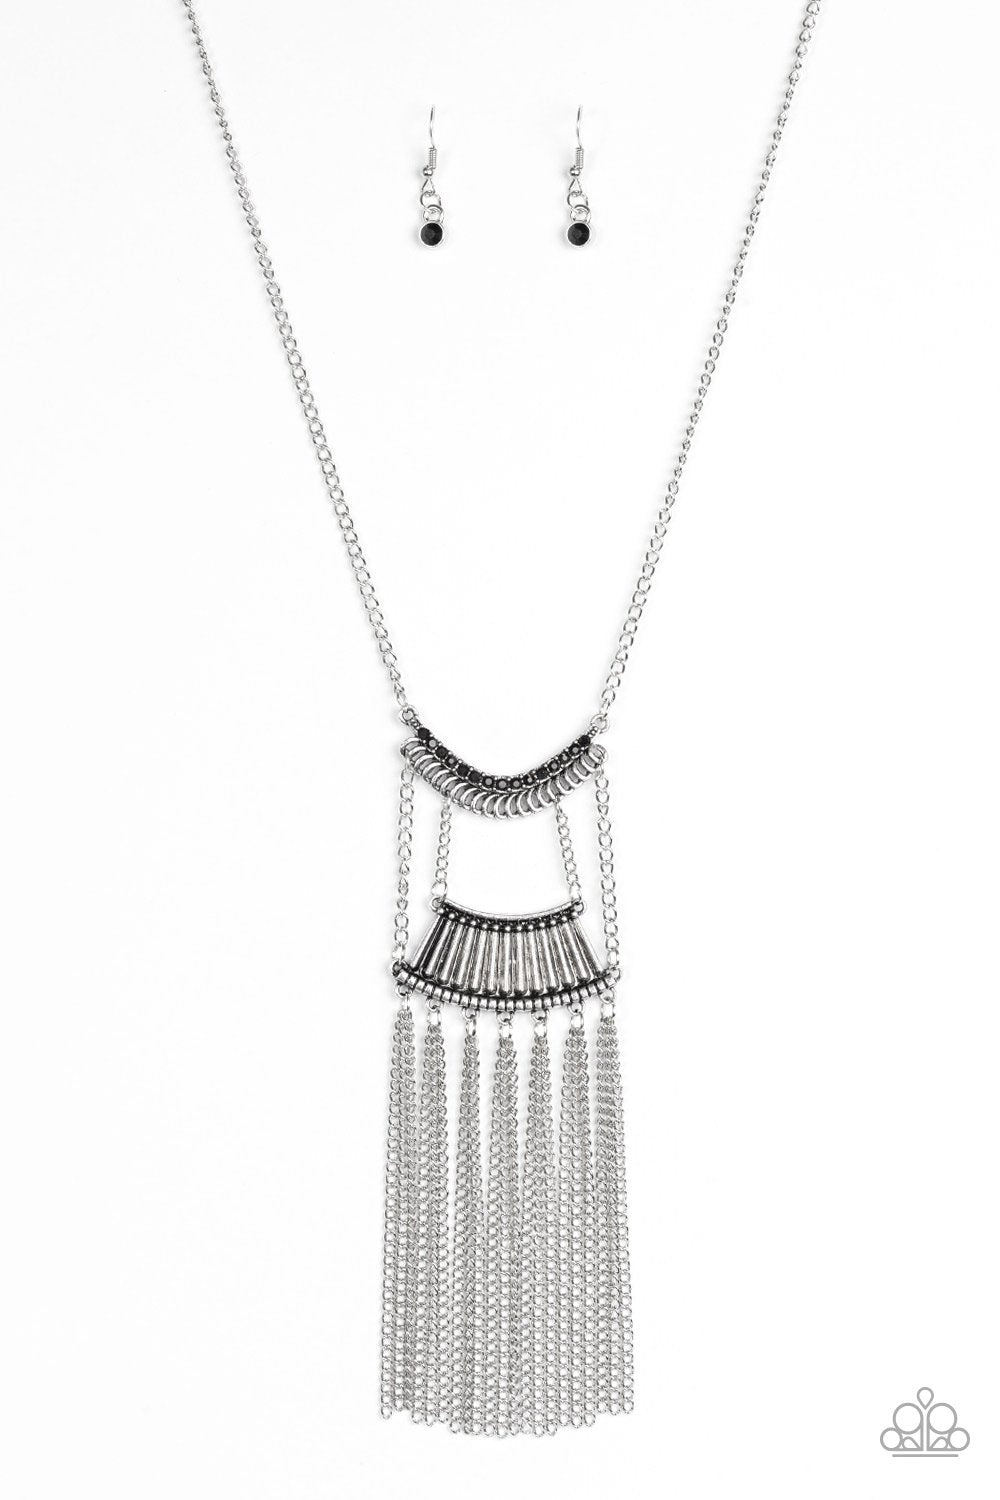 Glam Goddess Black and Silver Necklace - Paparazzi Accessories-CarasShop.com - $5 Jewelry by Cara Jewels